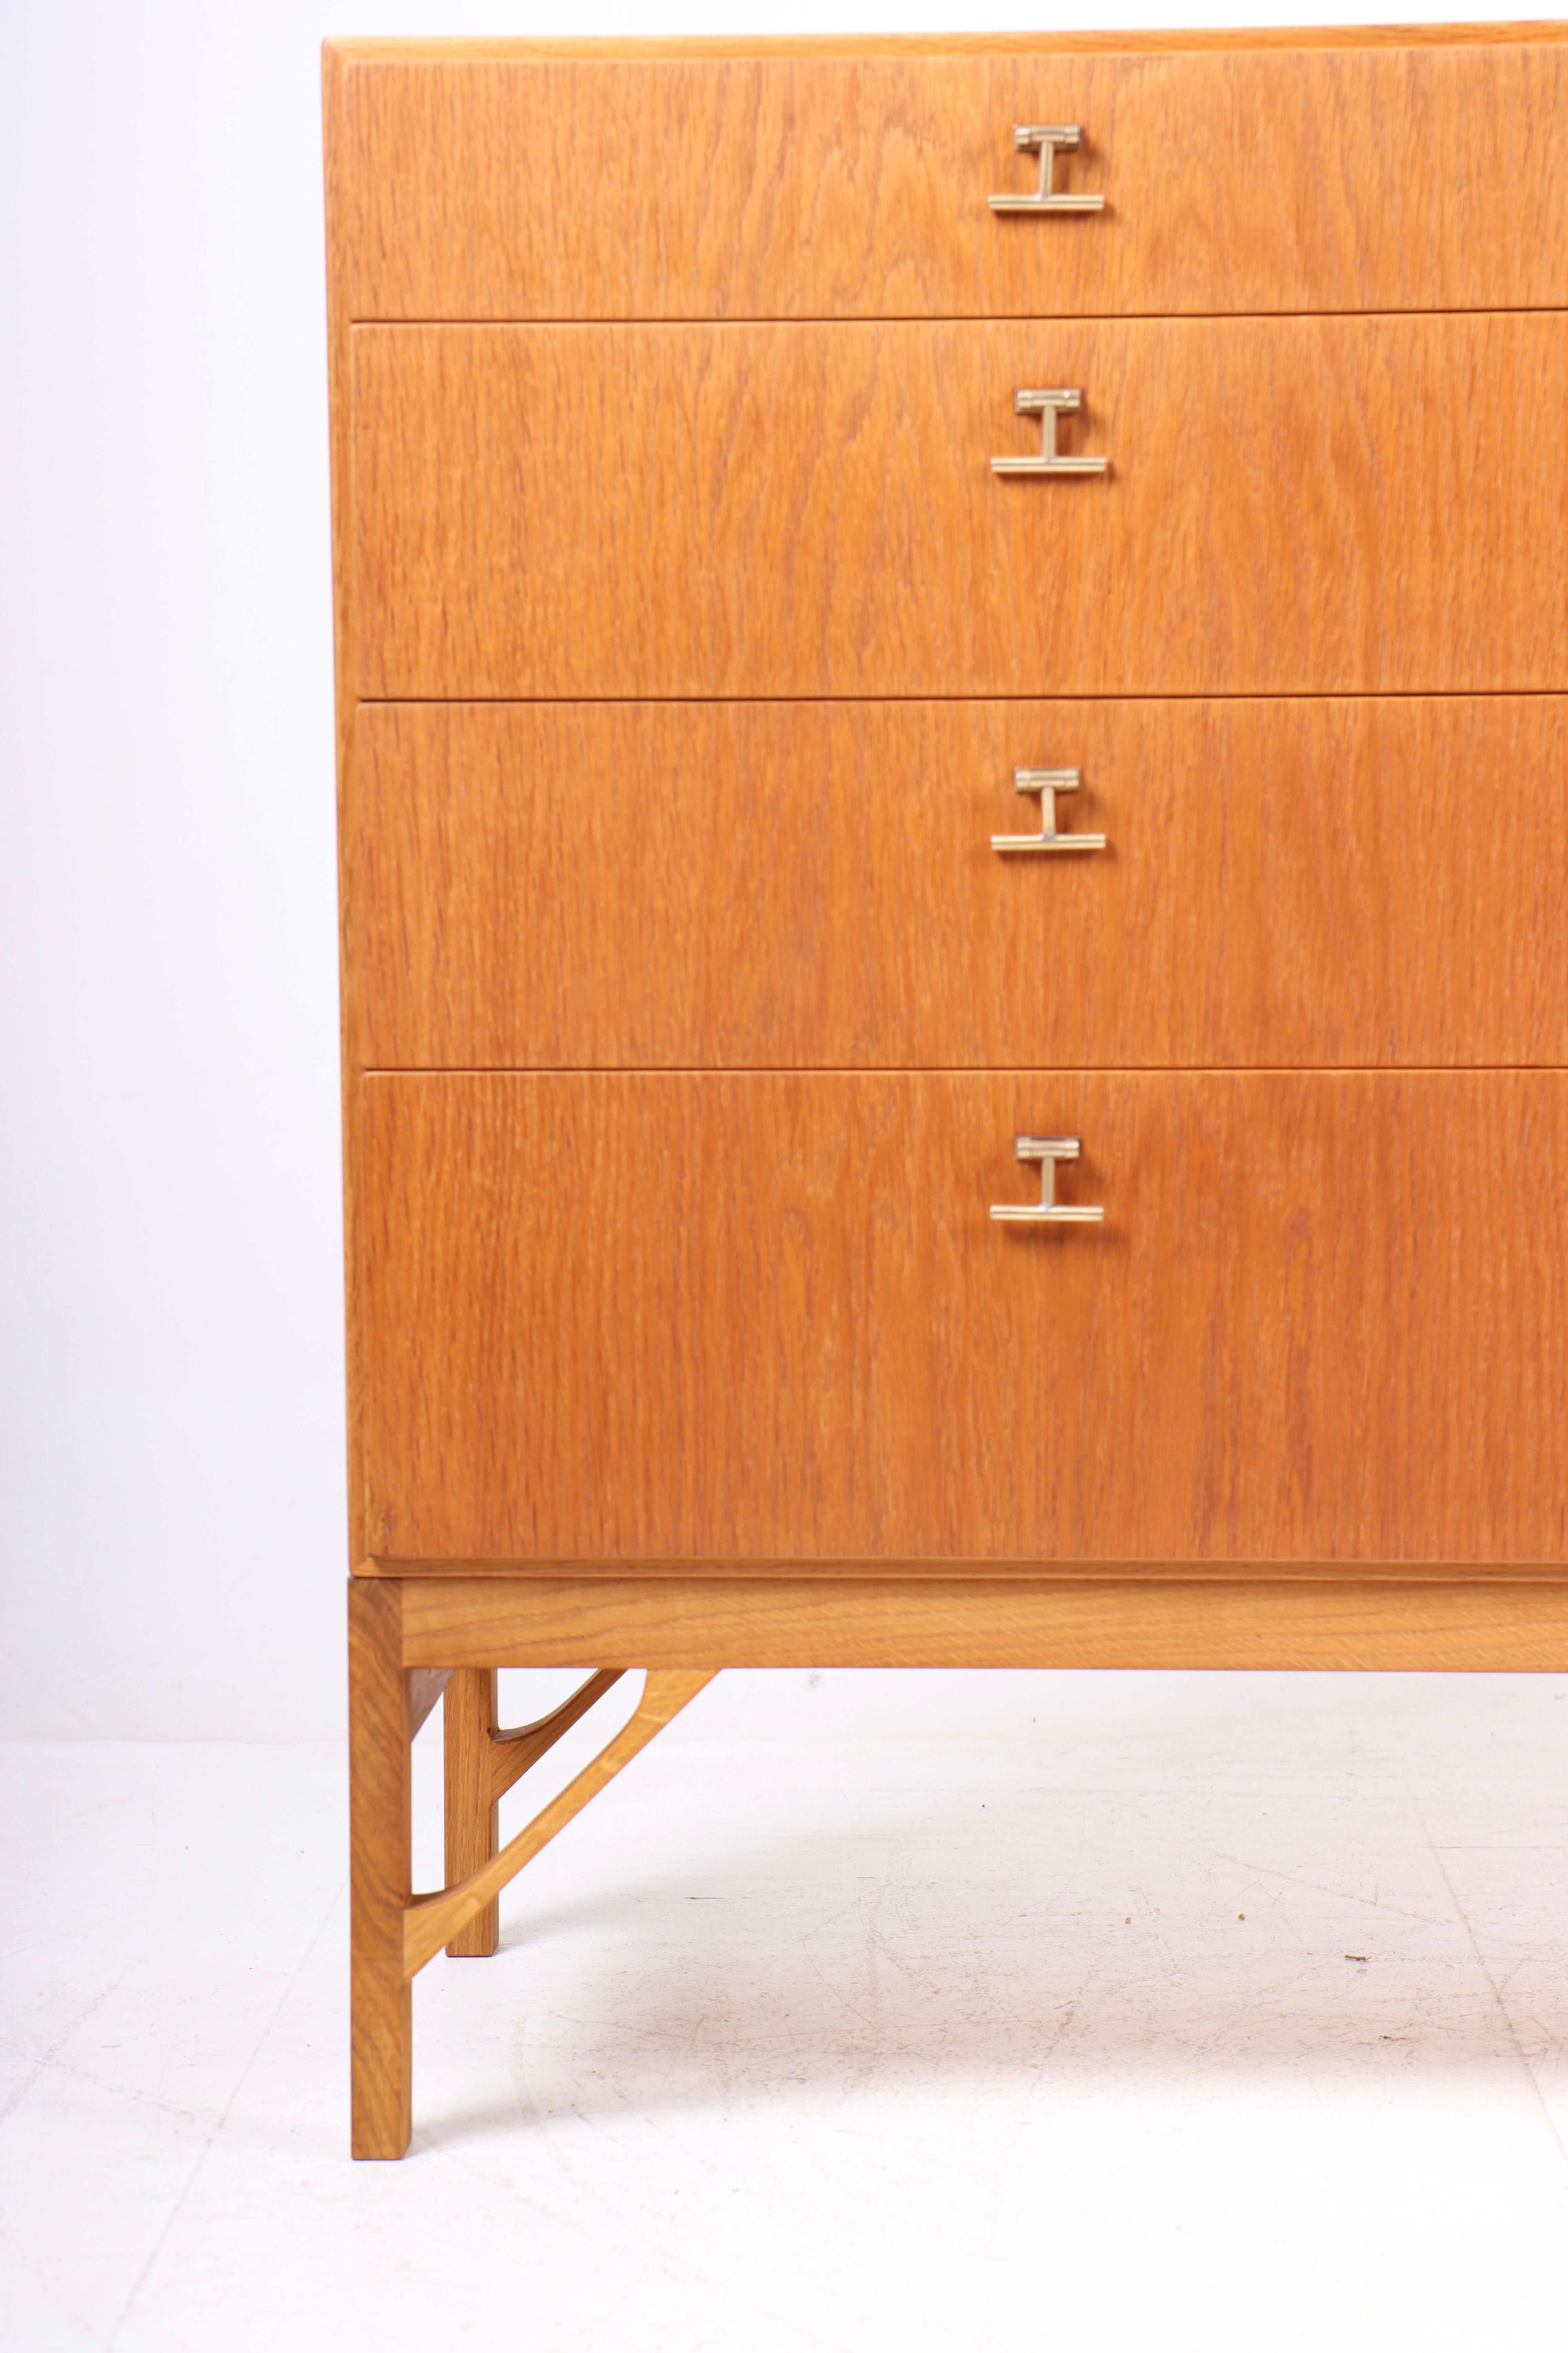 Commode in Scandinavian oak with hardware in brass. Designed by MAA. Børge Mogensen in the 1950s, this piece is made by CM Madsen cabinetmakers, Denmark in the 1960s. Great condition.